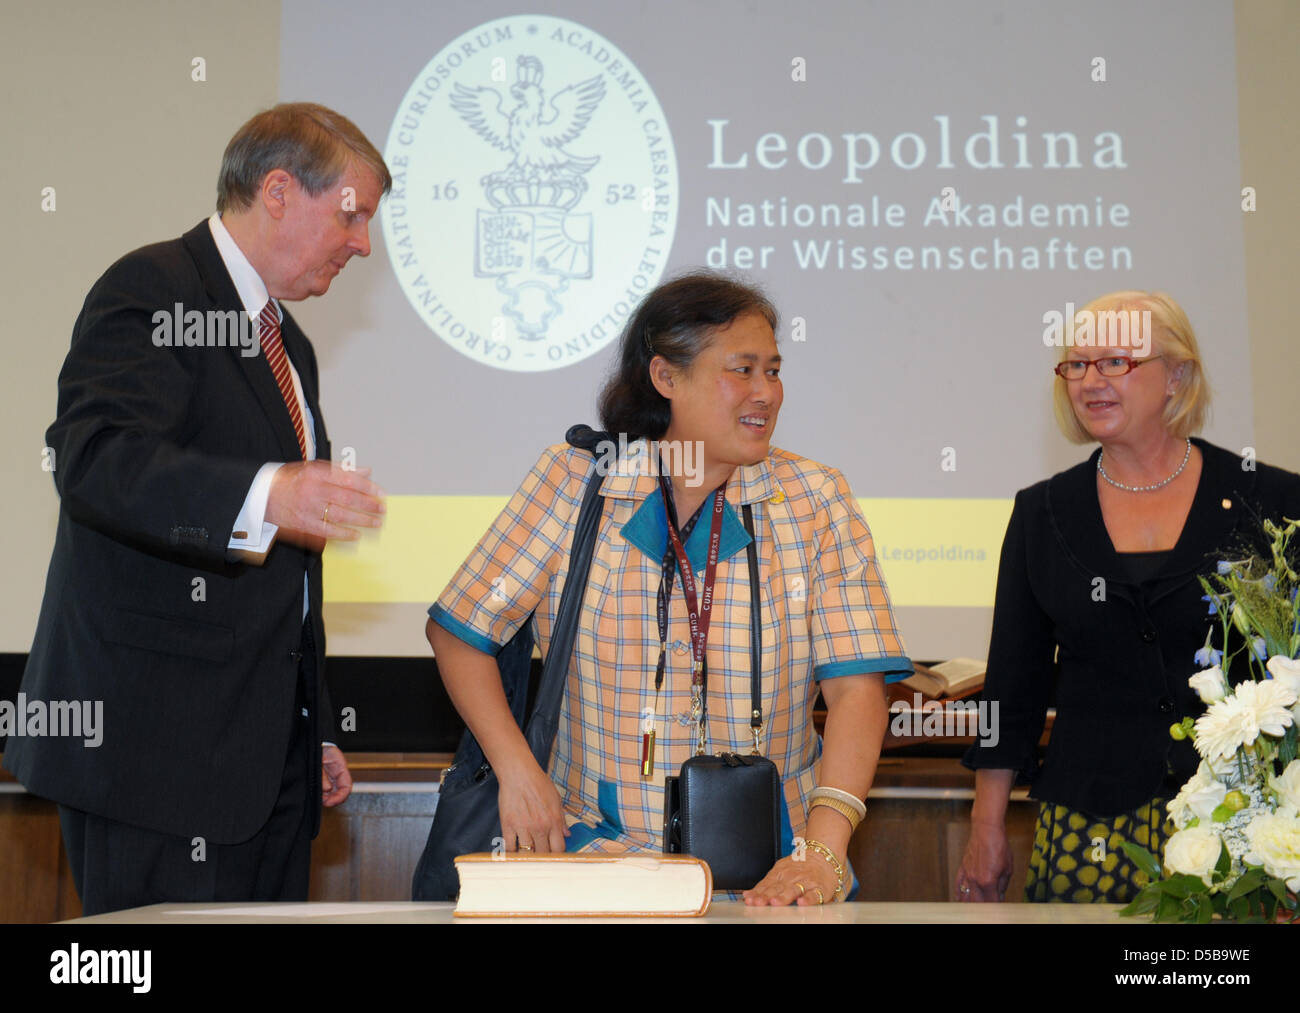 Thai Princess Maha Chakri Sirindhorn (C) signs the guestbook of German Academy of Science Leopoldina in company of Joerg Hacker (L), President of Leopoldina, and Jutta Schnitzer-Ungefug (R), Secretary-General of Leopoldina, at the adacemy in Halle Saale, Germany, 16 August 2010. The Princess informs herself on the German education and research system as it is the Princess's main ar Stock Photo